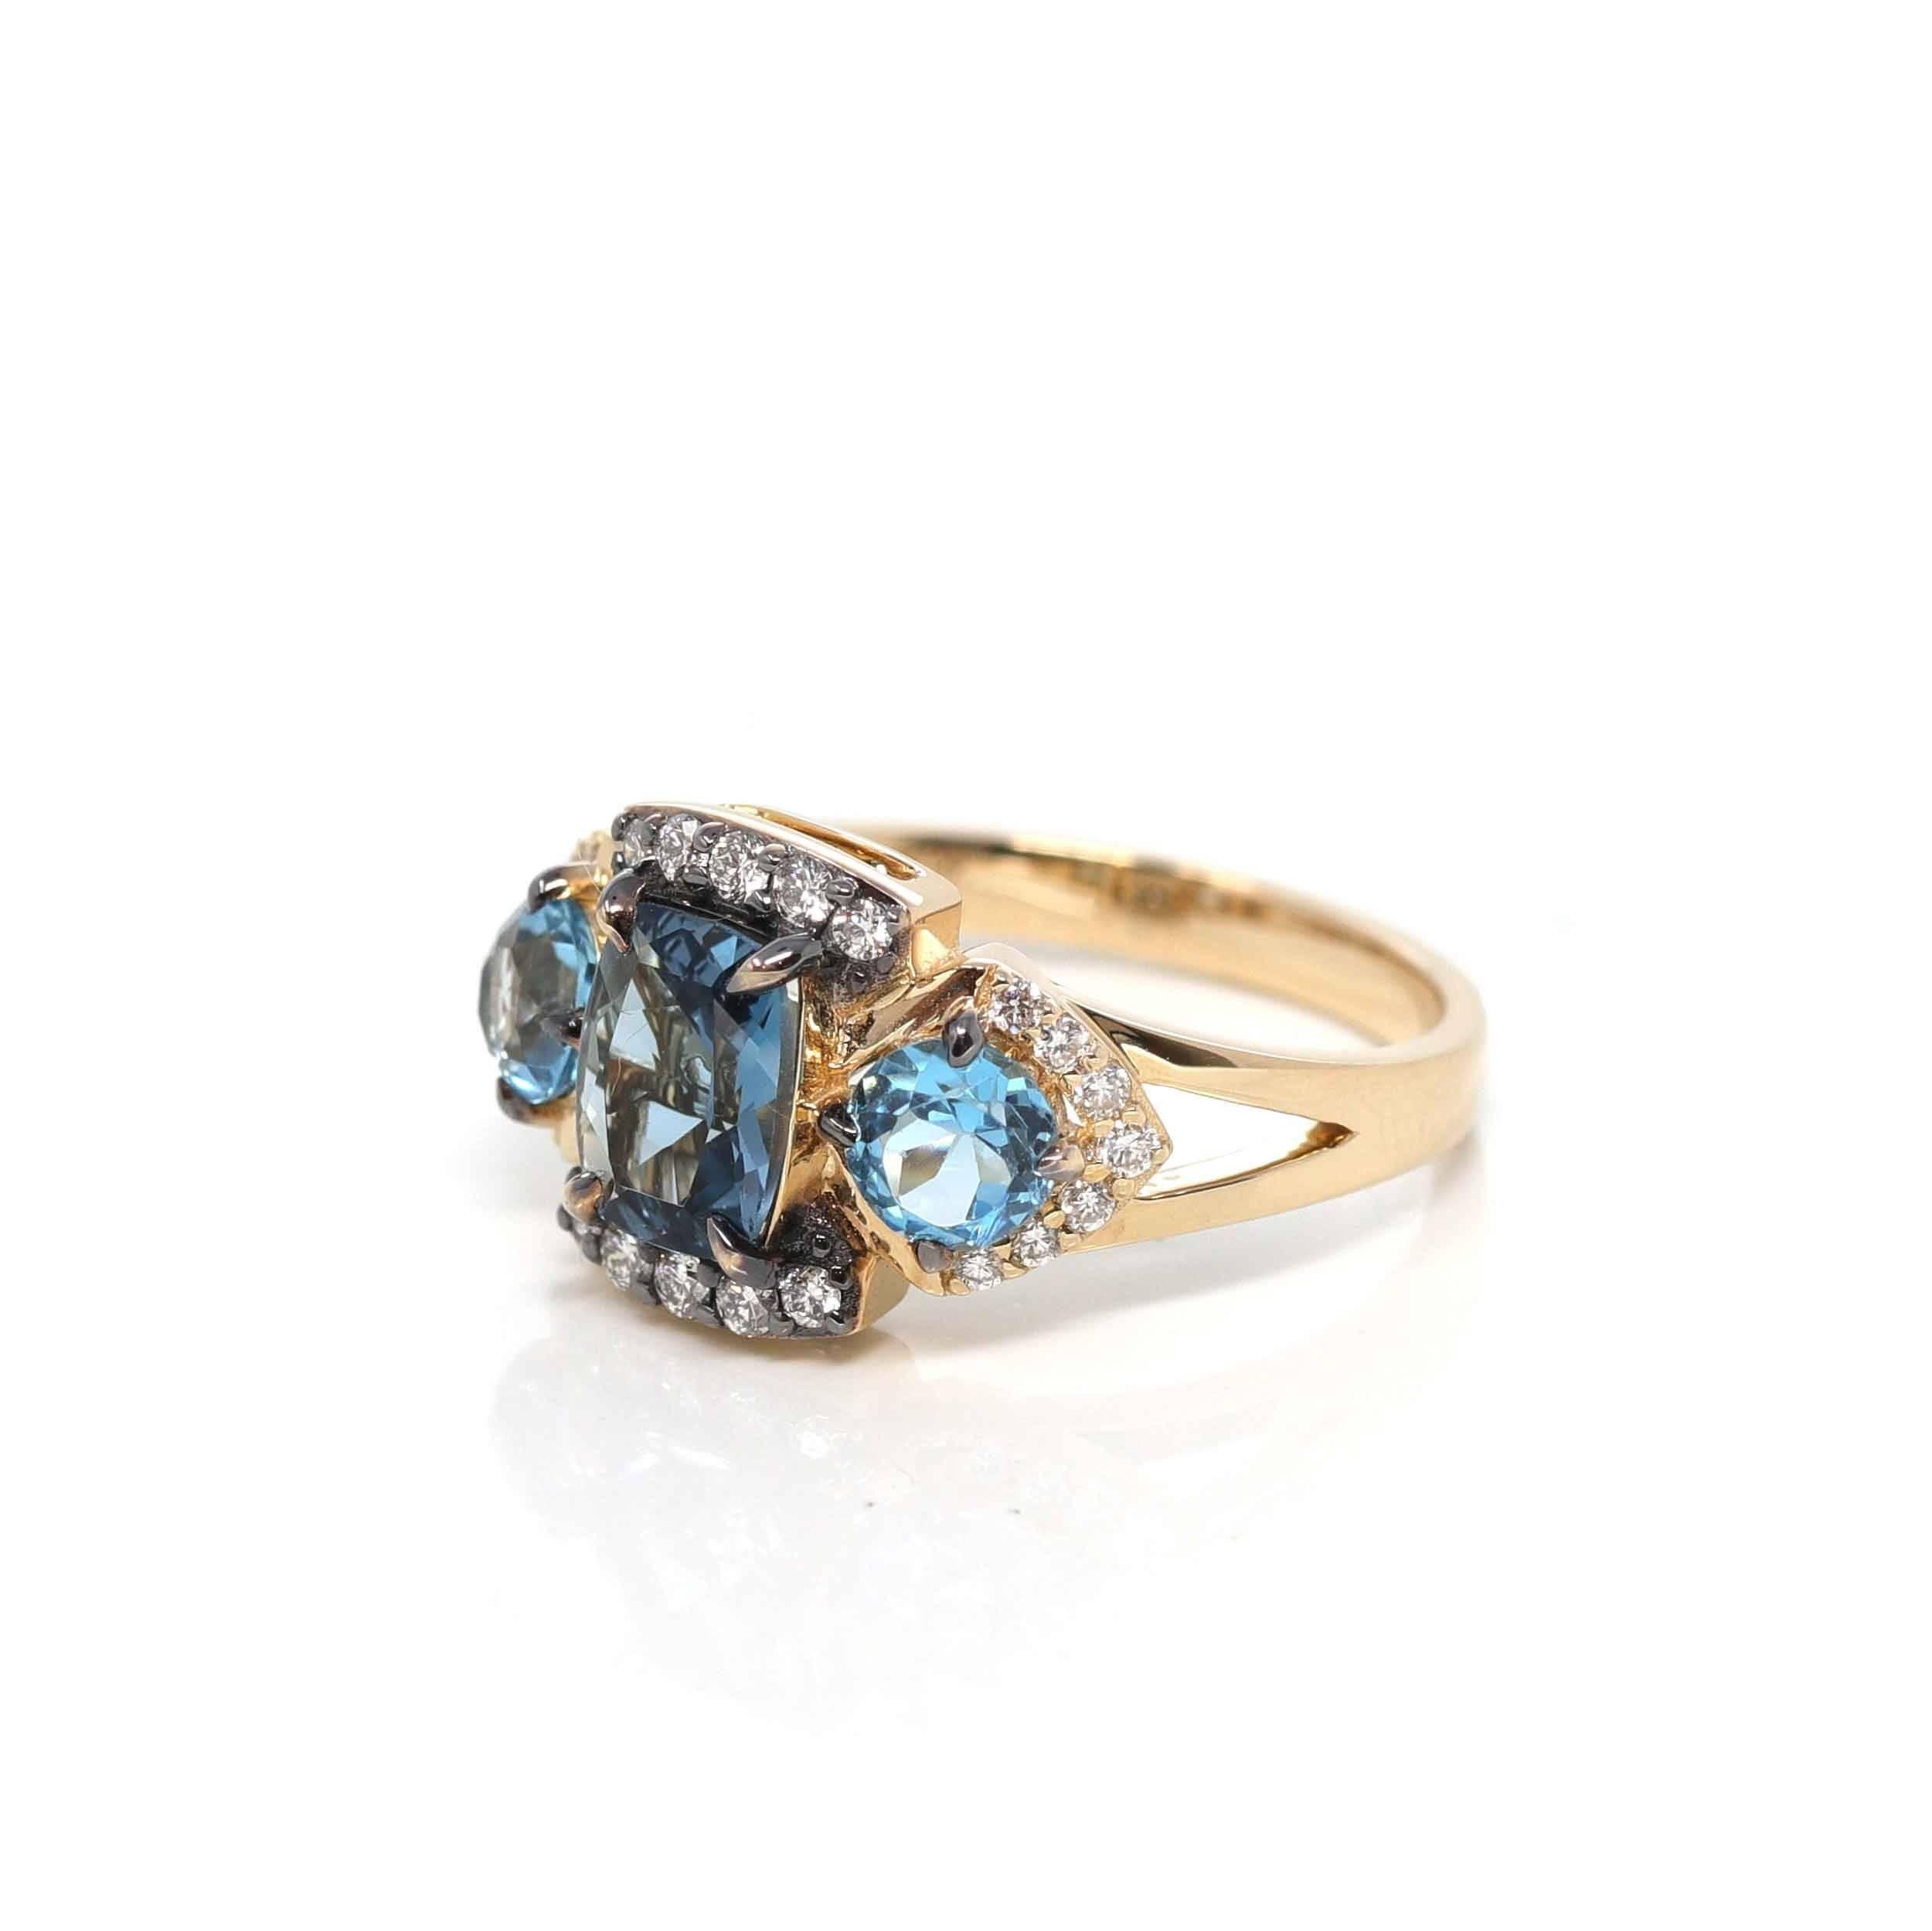 * Design Concept--- This ring features 3 Natural AAA topaz cushion cut, totaling 3.01 ct. The design is simplistic yet elegant. The ring looks very exquisite with some diamonds tracing the accents. Baikalla artisans are dedicated to combining